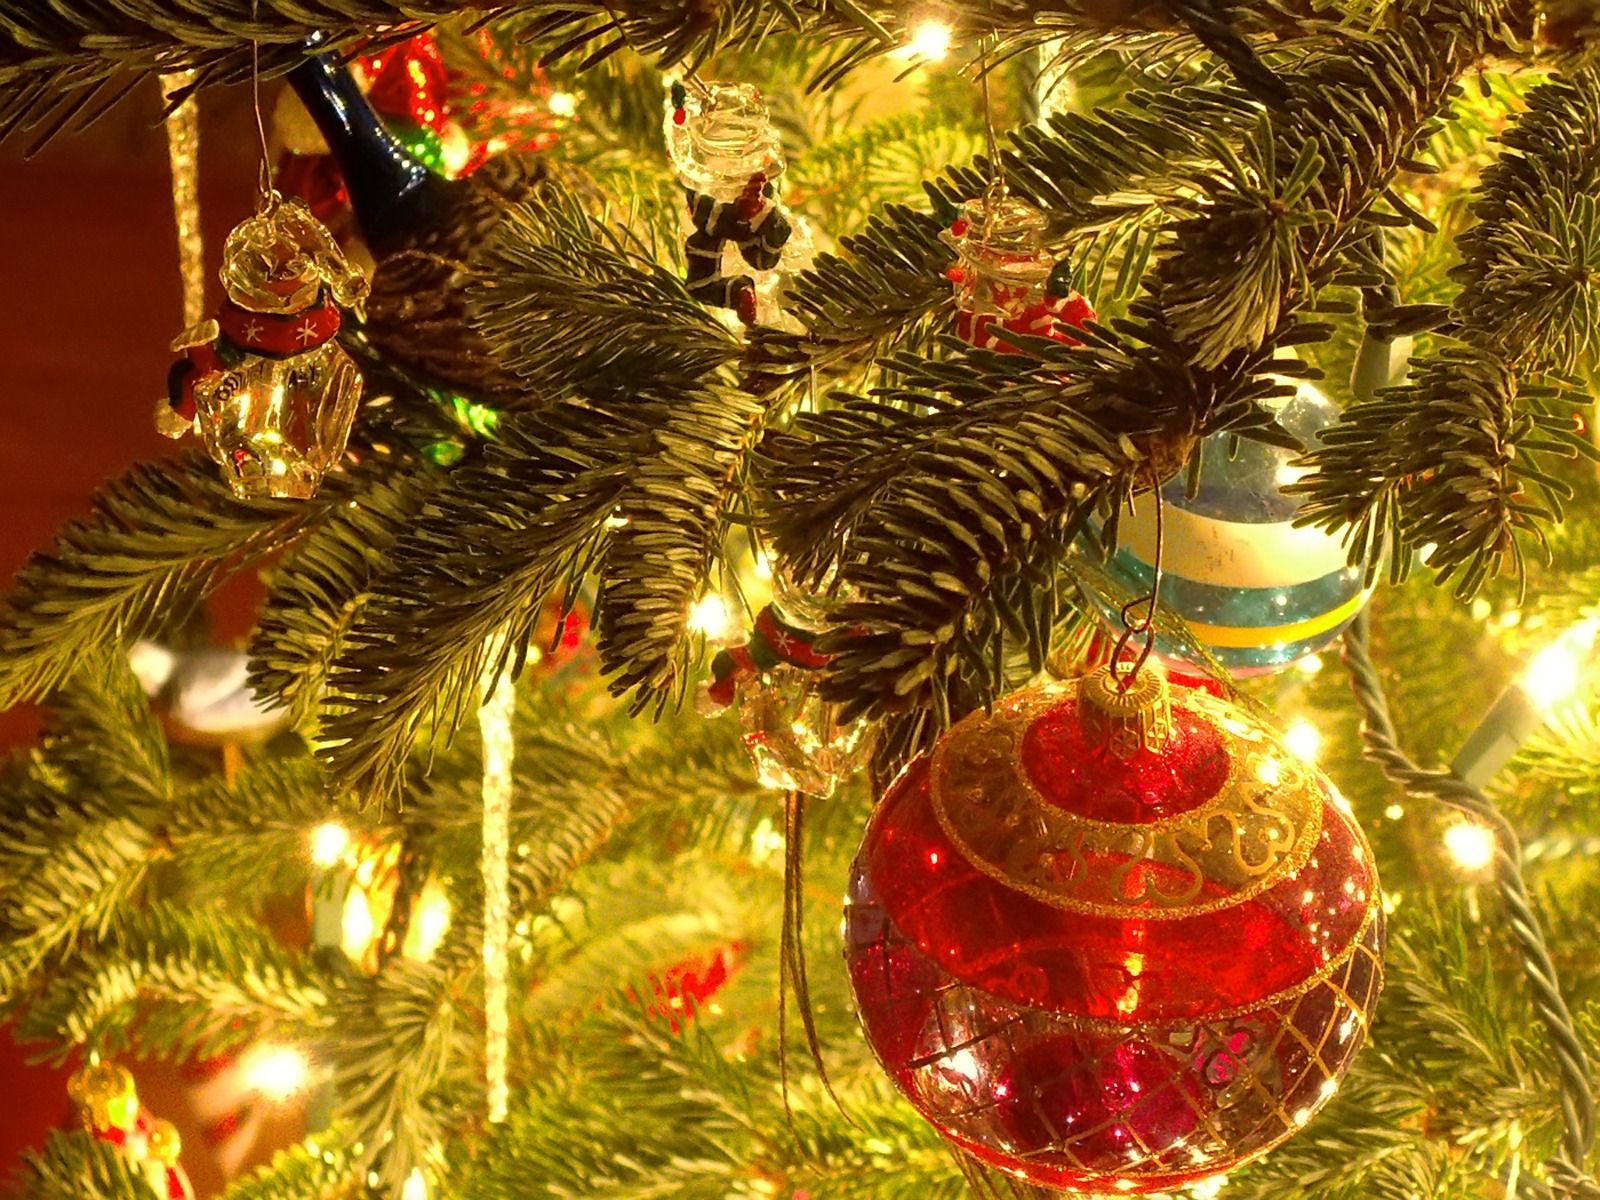 Christmas Tree Ornaments Wallpaper Christmas Holidays Wallpaper in jpg format for free download